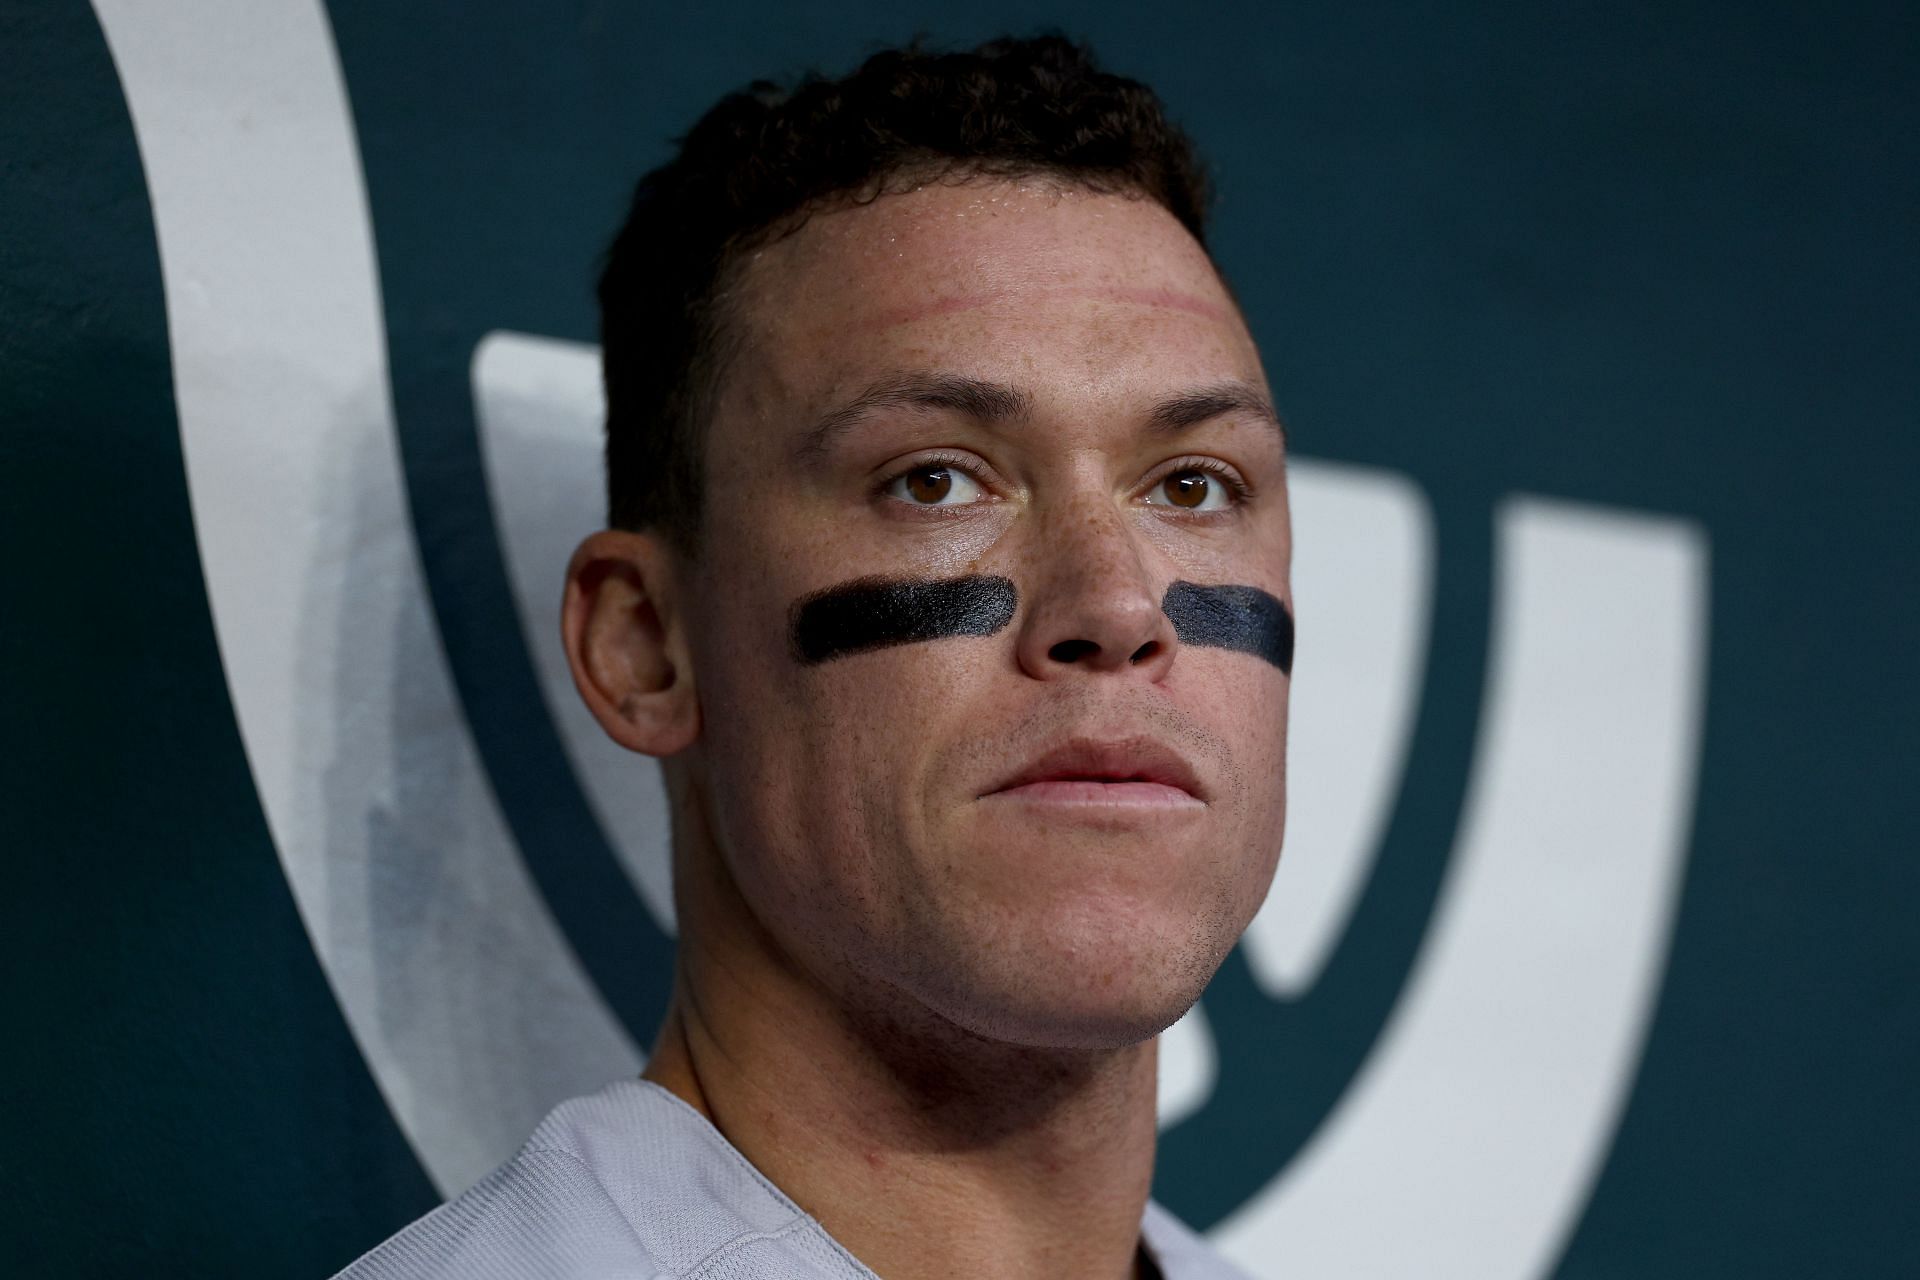 Aaron Judge looks on as the New York Yankees take on the Texas Rangers at Globe Life Field